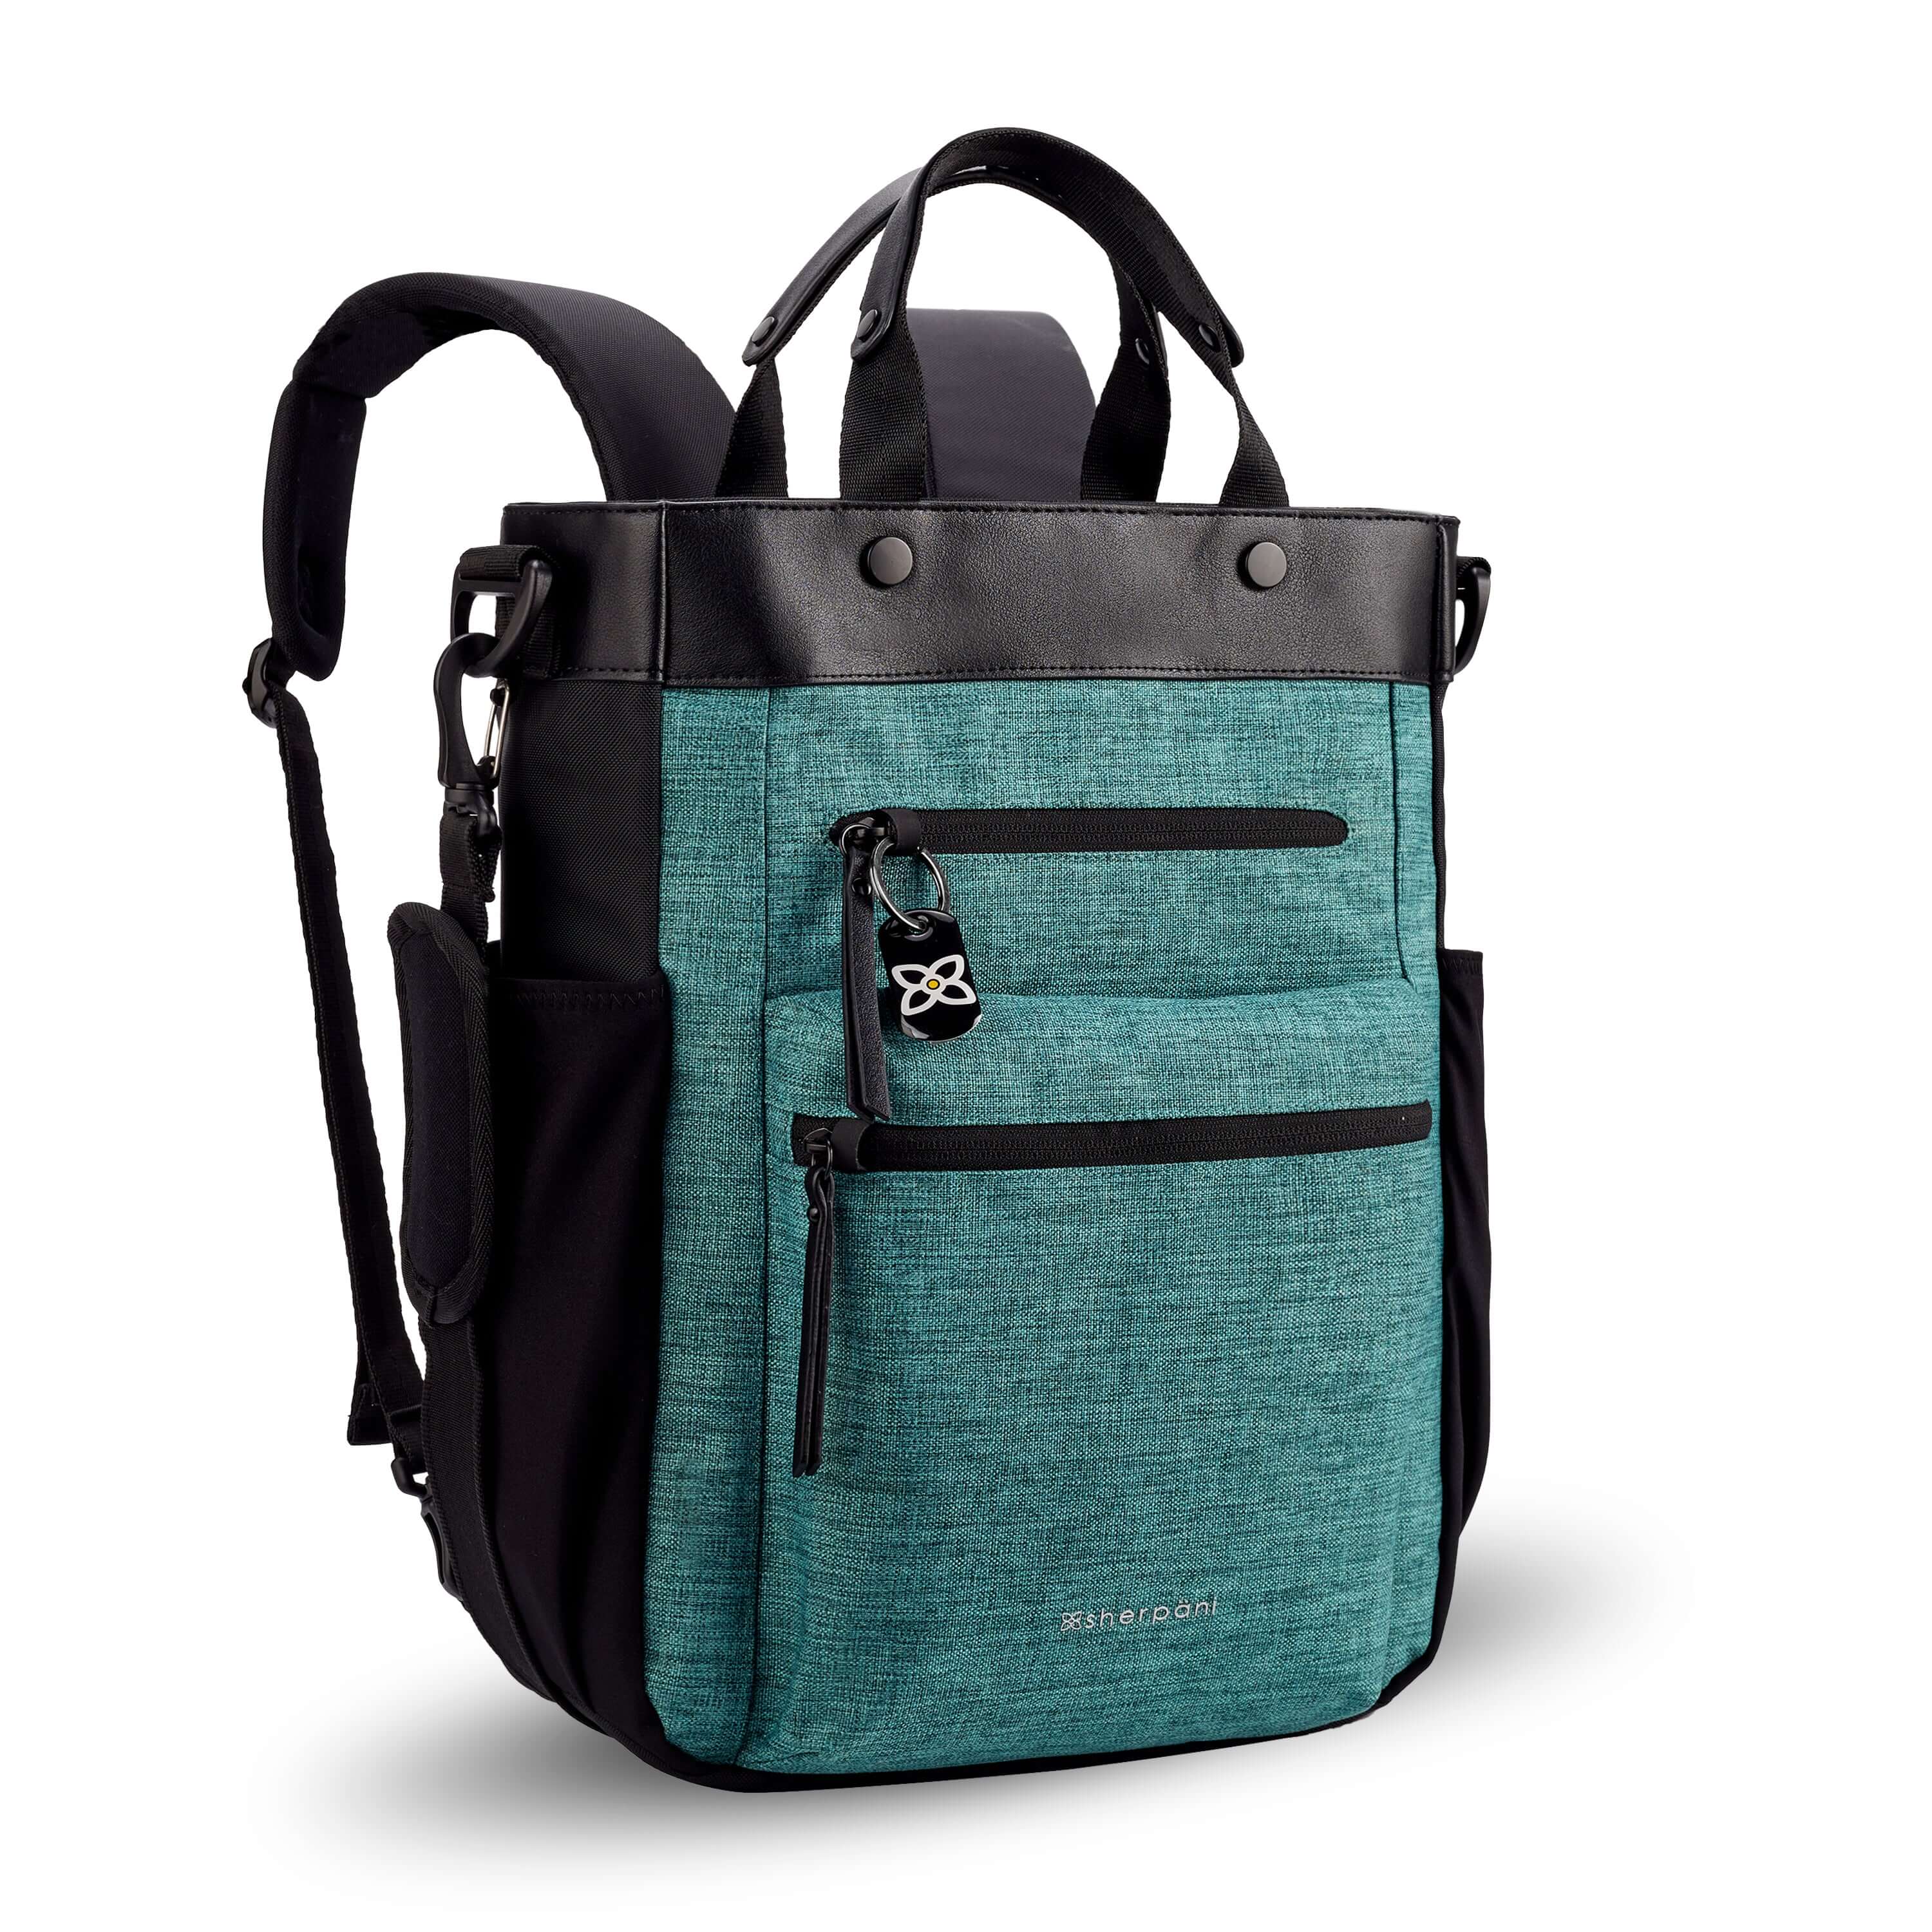 Angled front view of Sherpani&#39;s Anti-Theft bag, the Soleil AT in Teal, with vegan leather accents in black. On the front are two locking zipper compartments, a ReturnMe tag is clipped to the upper one. Two elastic water bottle holders sit on either side of the bag. It has padded backpack straps, short tote handles, and an adjustable/detachable crossbody strap. 